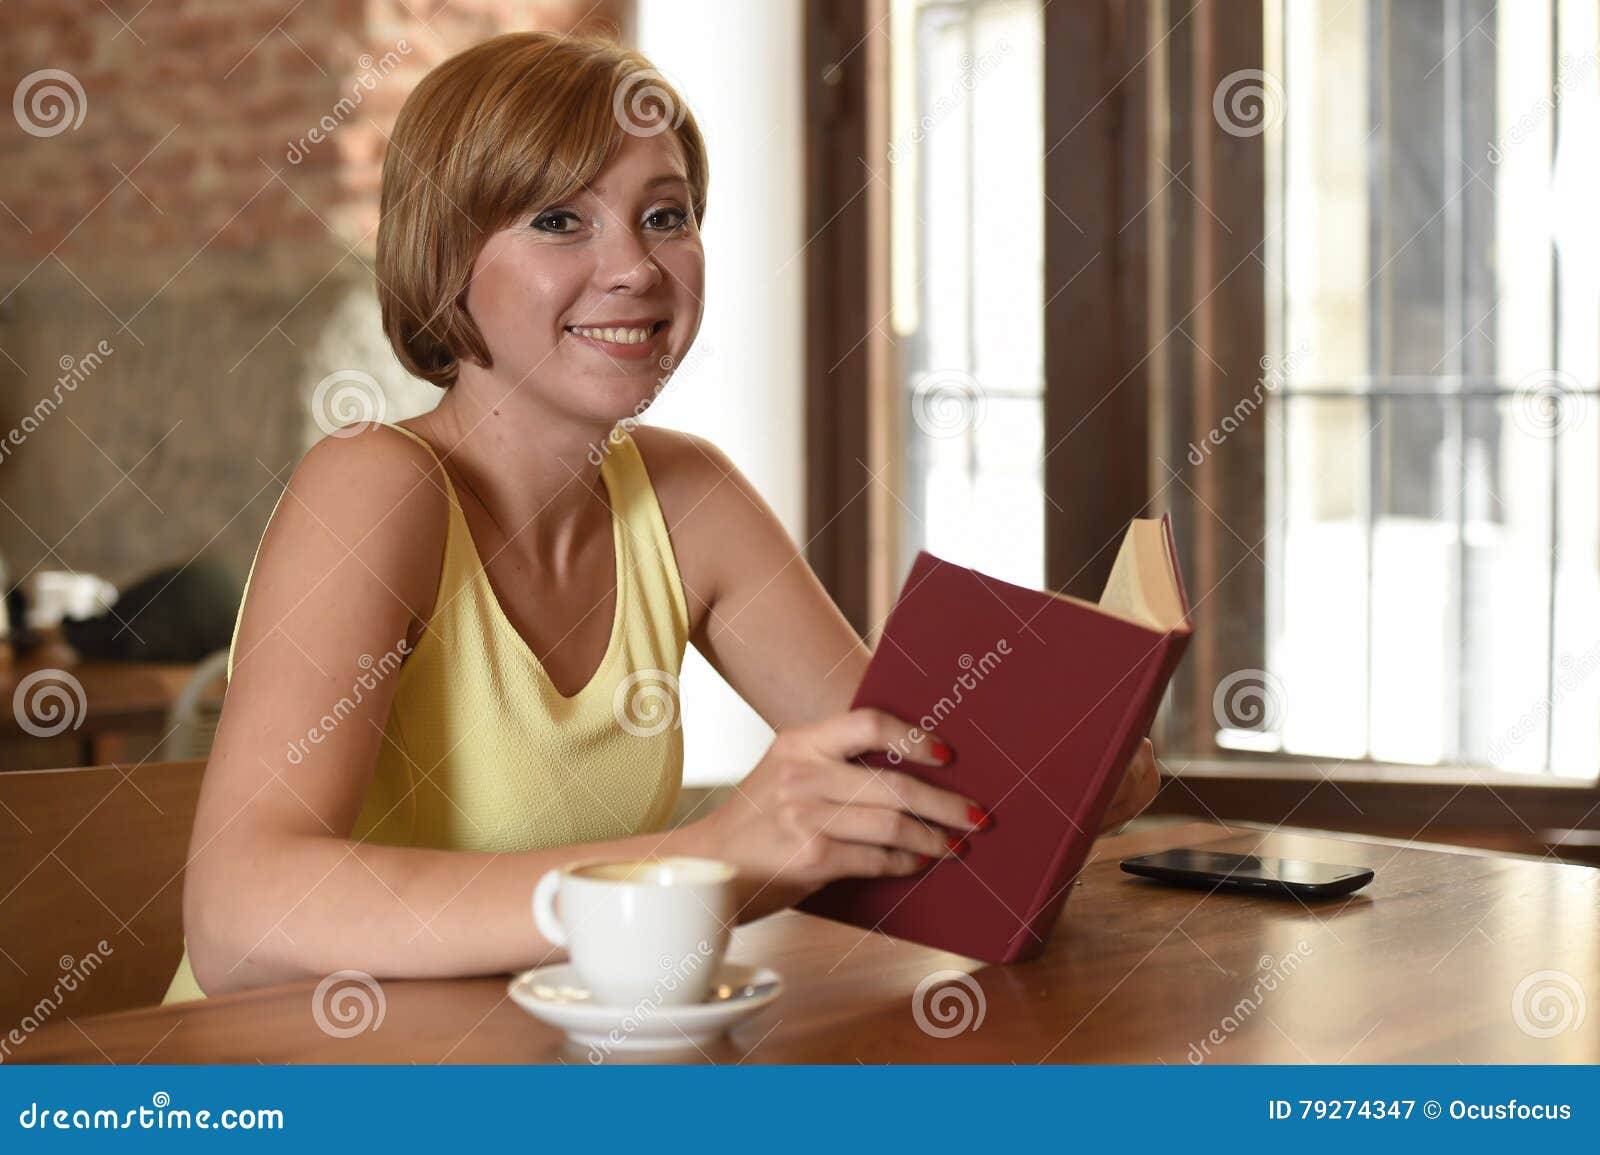 Pretty Woman Enjoying Reading Book at Coffee Shop Drinking Cup of ...